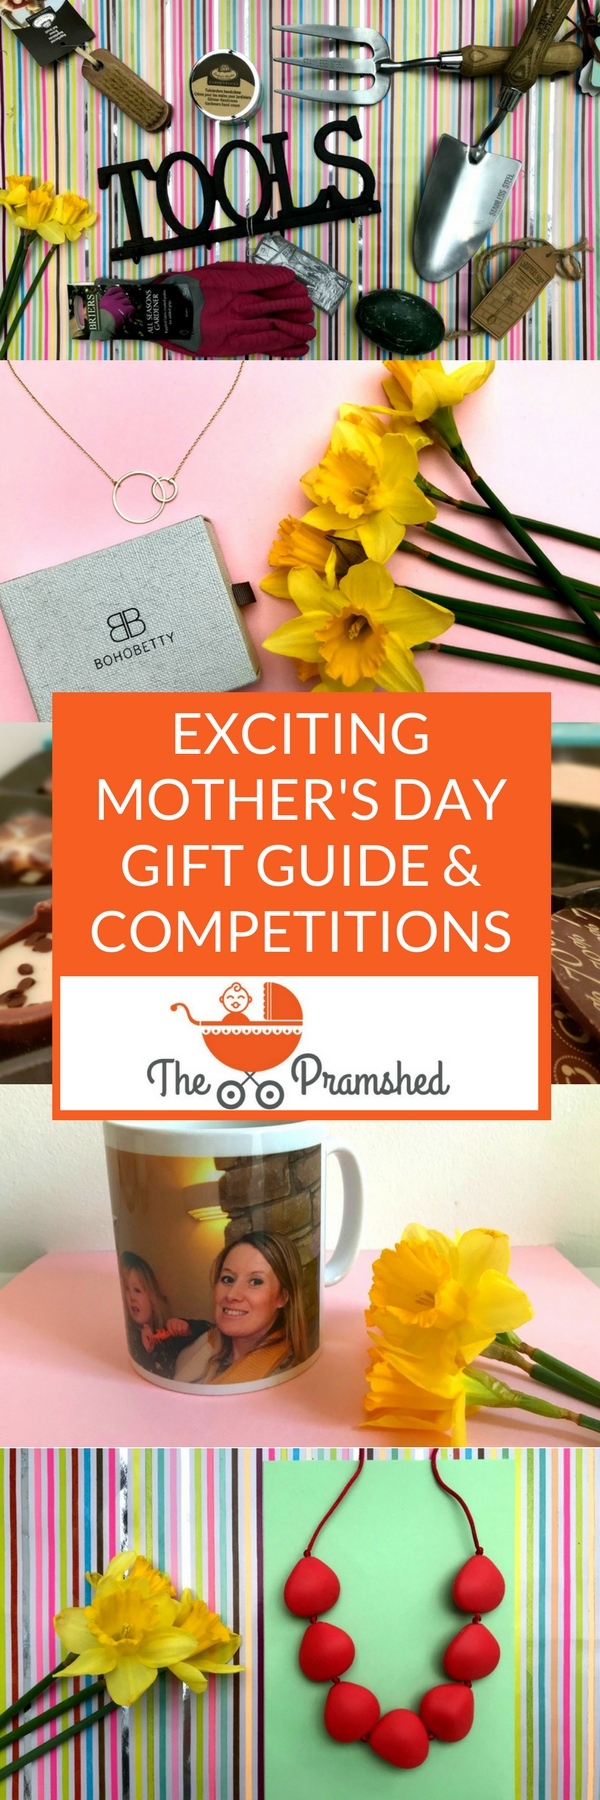 MOTHER'S DAY GIFT GUIDE & COMPETITIONS